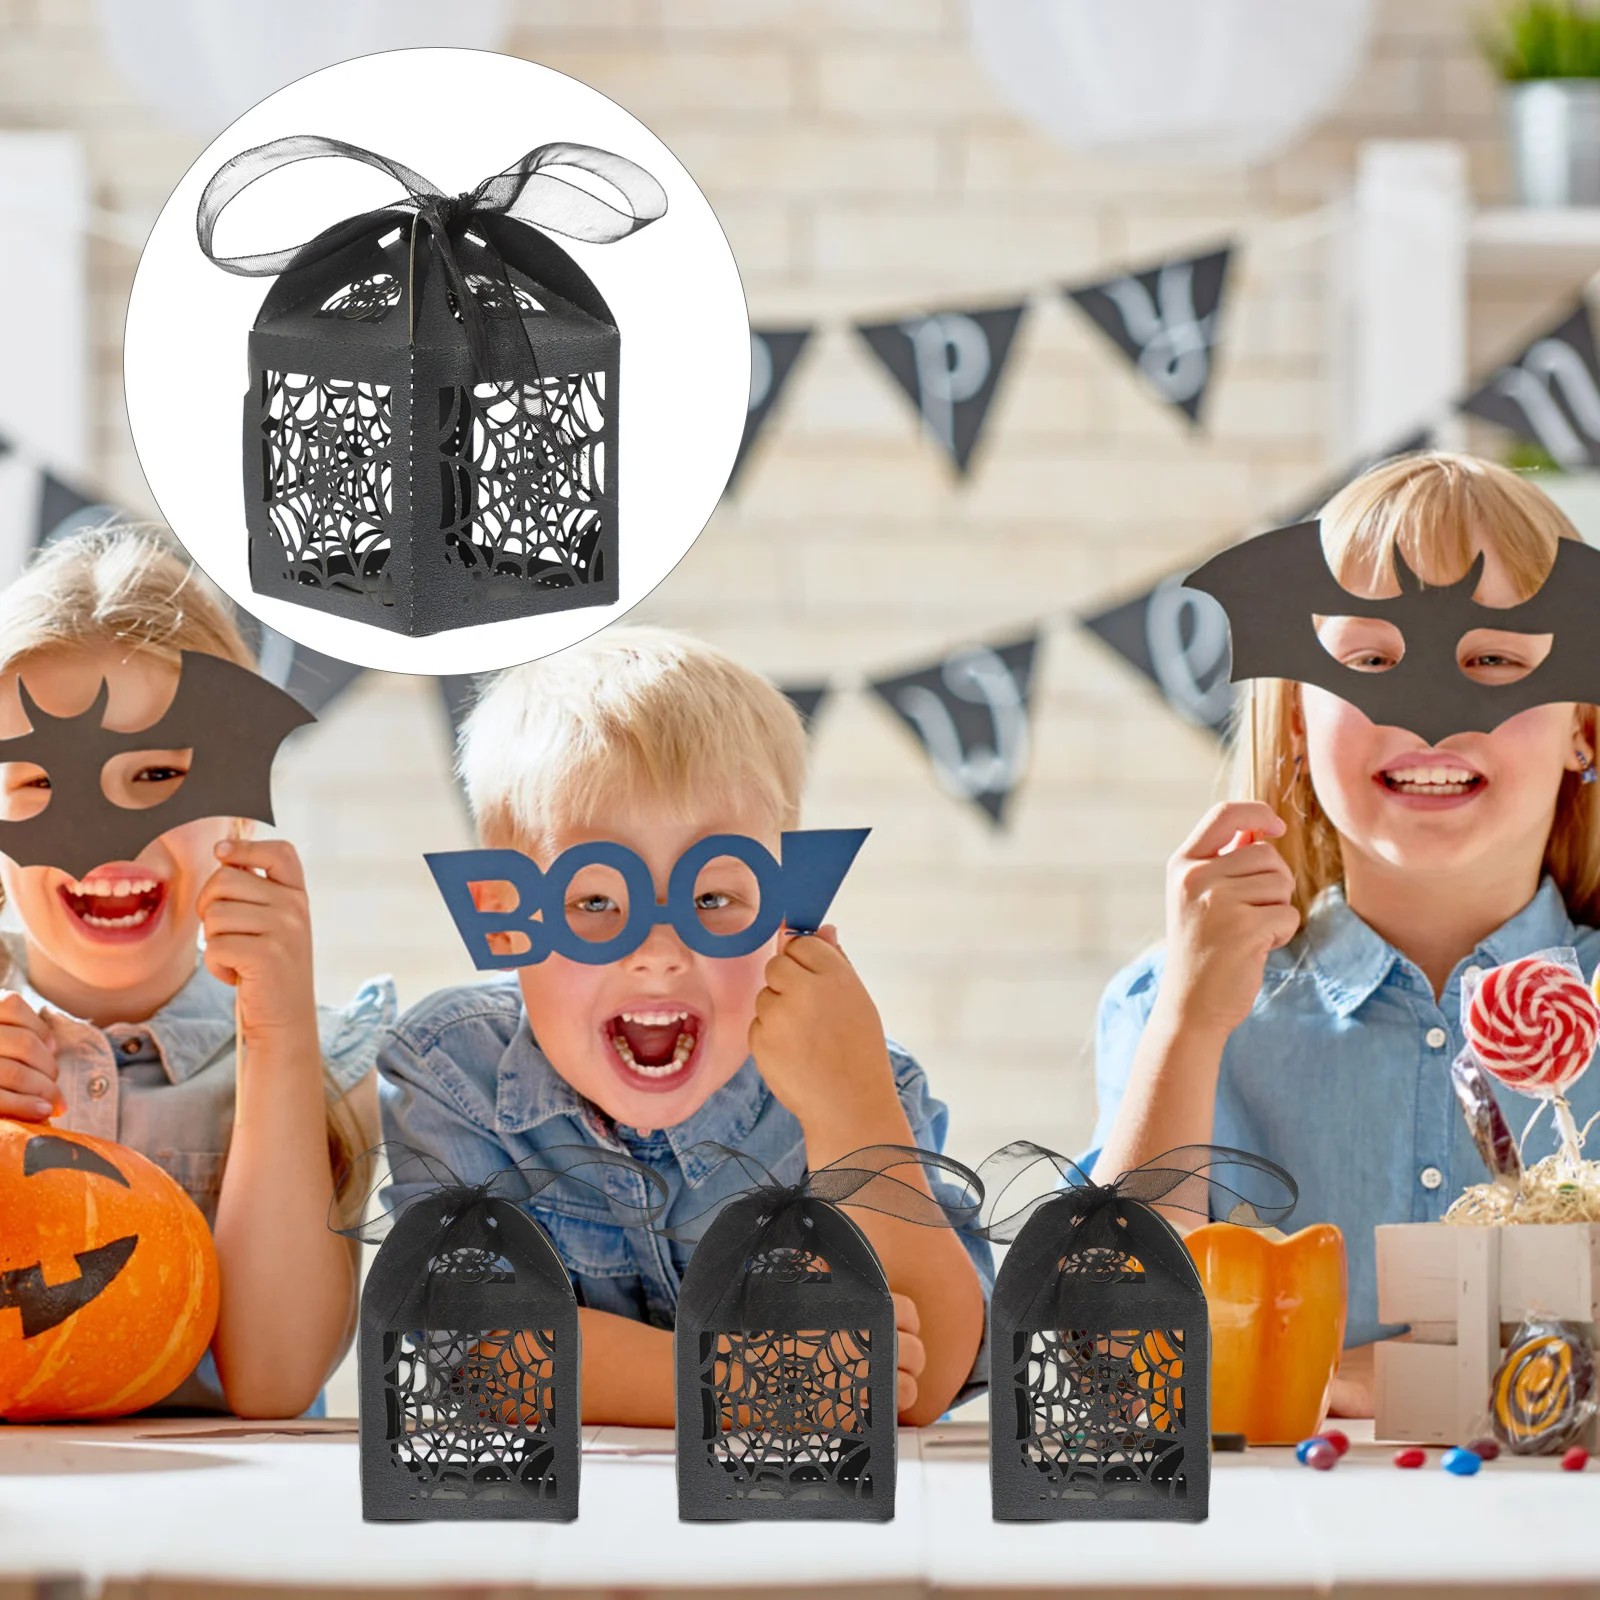 

50PCS Hollow Die-Cut Favor Boxes Halloween Wedding Candy Boxes Wedding Gift Boxes (Black) Gifts for guests Favors